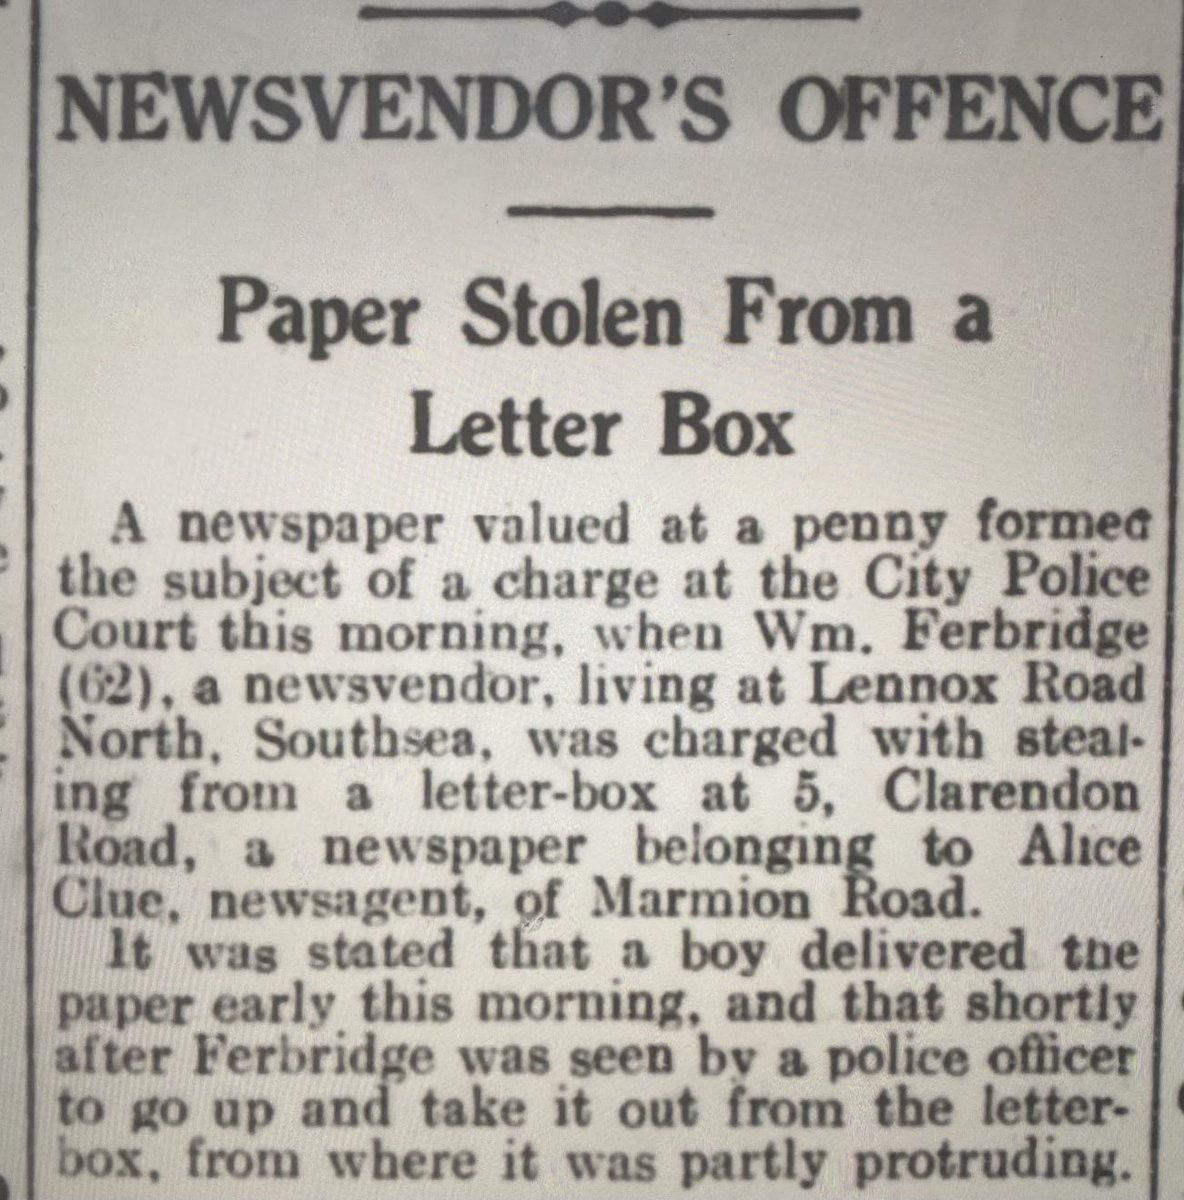 Crime! It has always been around. This particularly dark and egregious episode took place in 1933. For it to make the London newspapers only goes to underline the seriousness of the man’s actions!!!